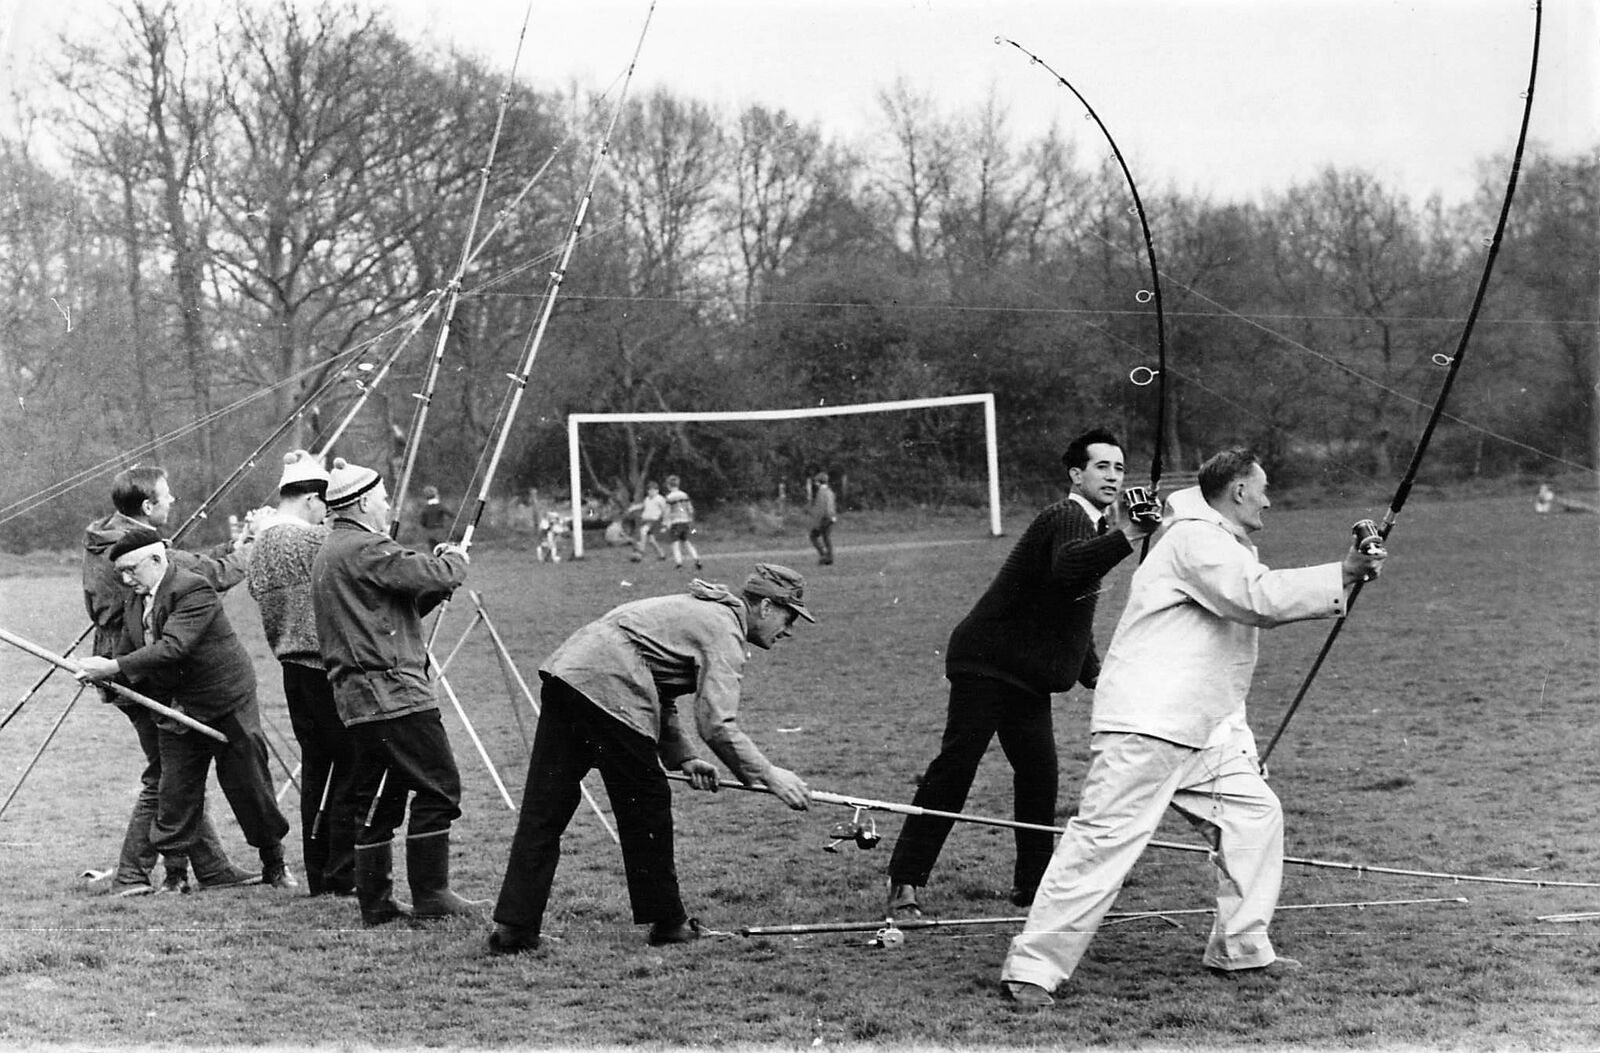 1967 Press Photo Angling Club Practices Casting Fishing on Soccer Football pitch